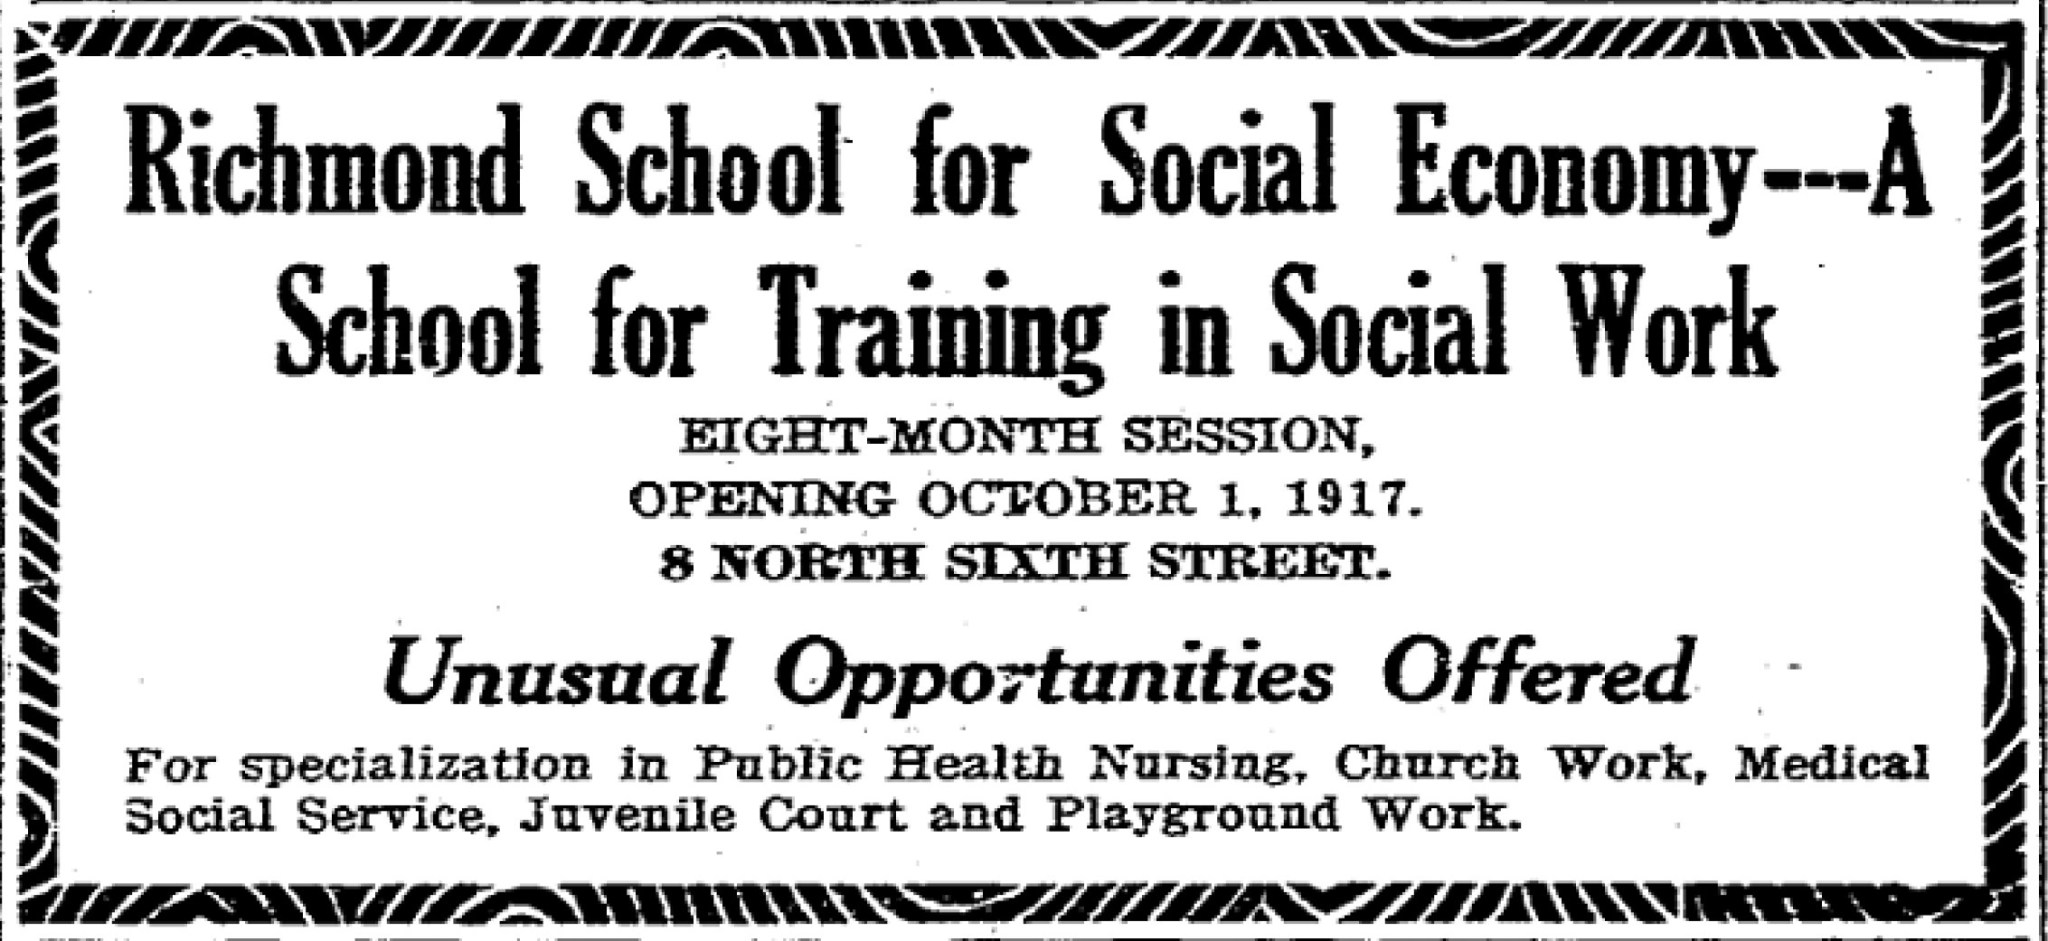 Advertisement in the Richmond Times-Dispatch for the Richmond School of Social Economy in 1917. Richmond School for Social Economy-A School for Training in Social Work. Eight-month session, opening October 1, 1917. 8 North Sixth Street. Unusual opportunities offered for specialization in public health nursing, church work, medical social service, juvenile court and playground work